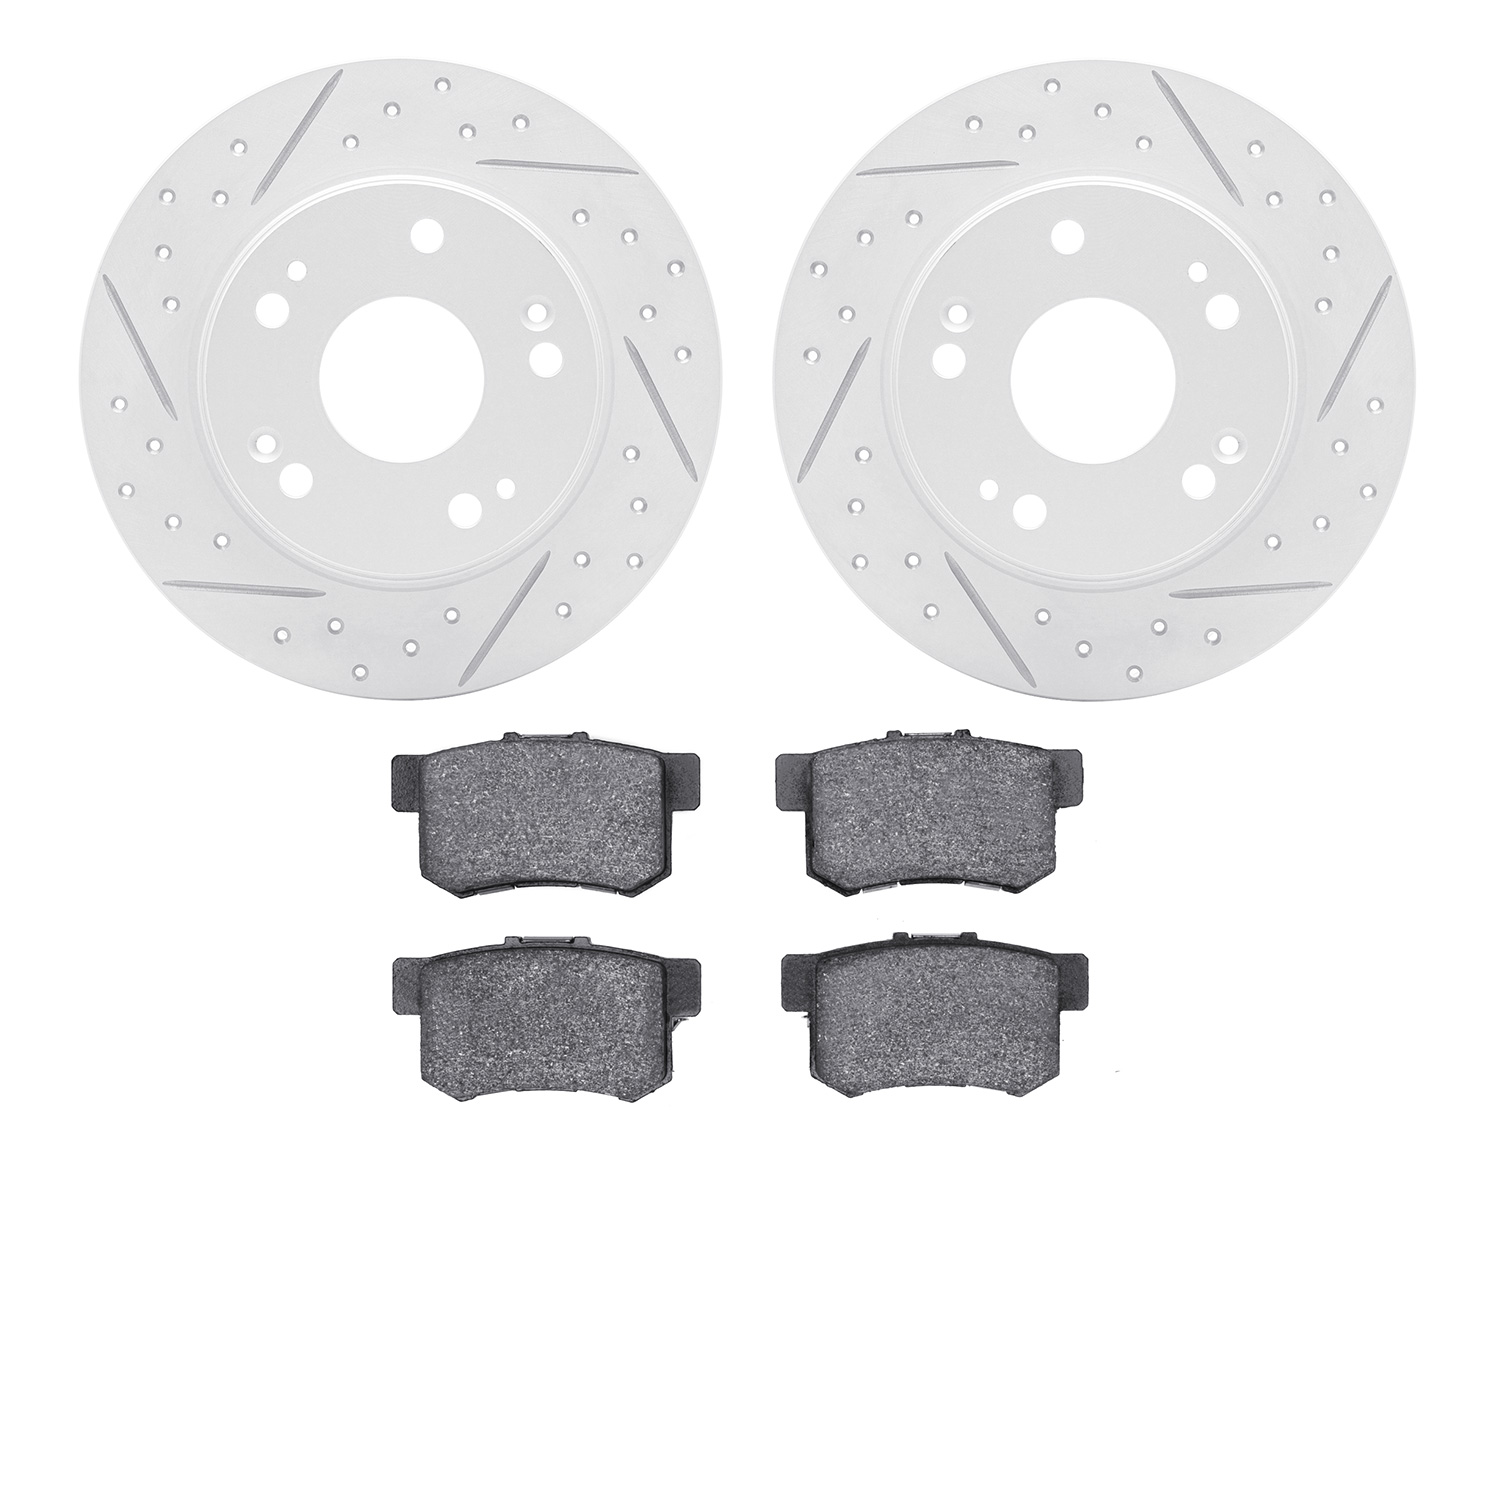 2502-59026 Geoperformance Drilled/Slotted Rotors w/5000 Advanced Brake Pads Kit, 2003-2008 Acura/Honda, Position: Rear